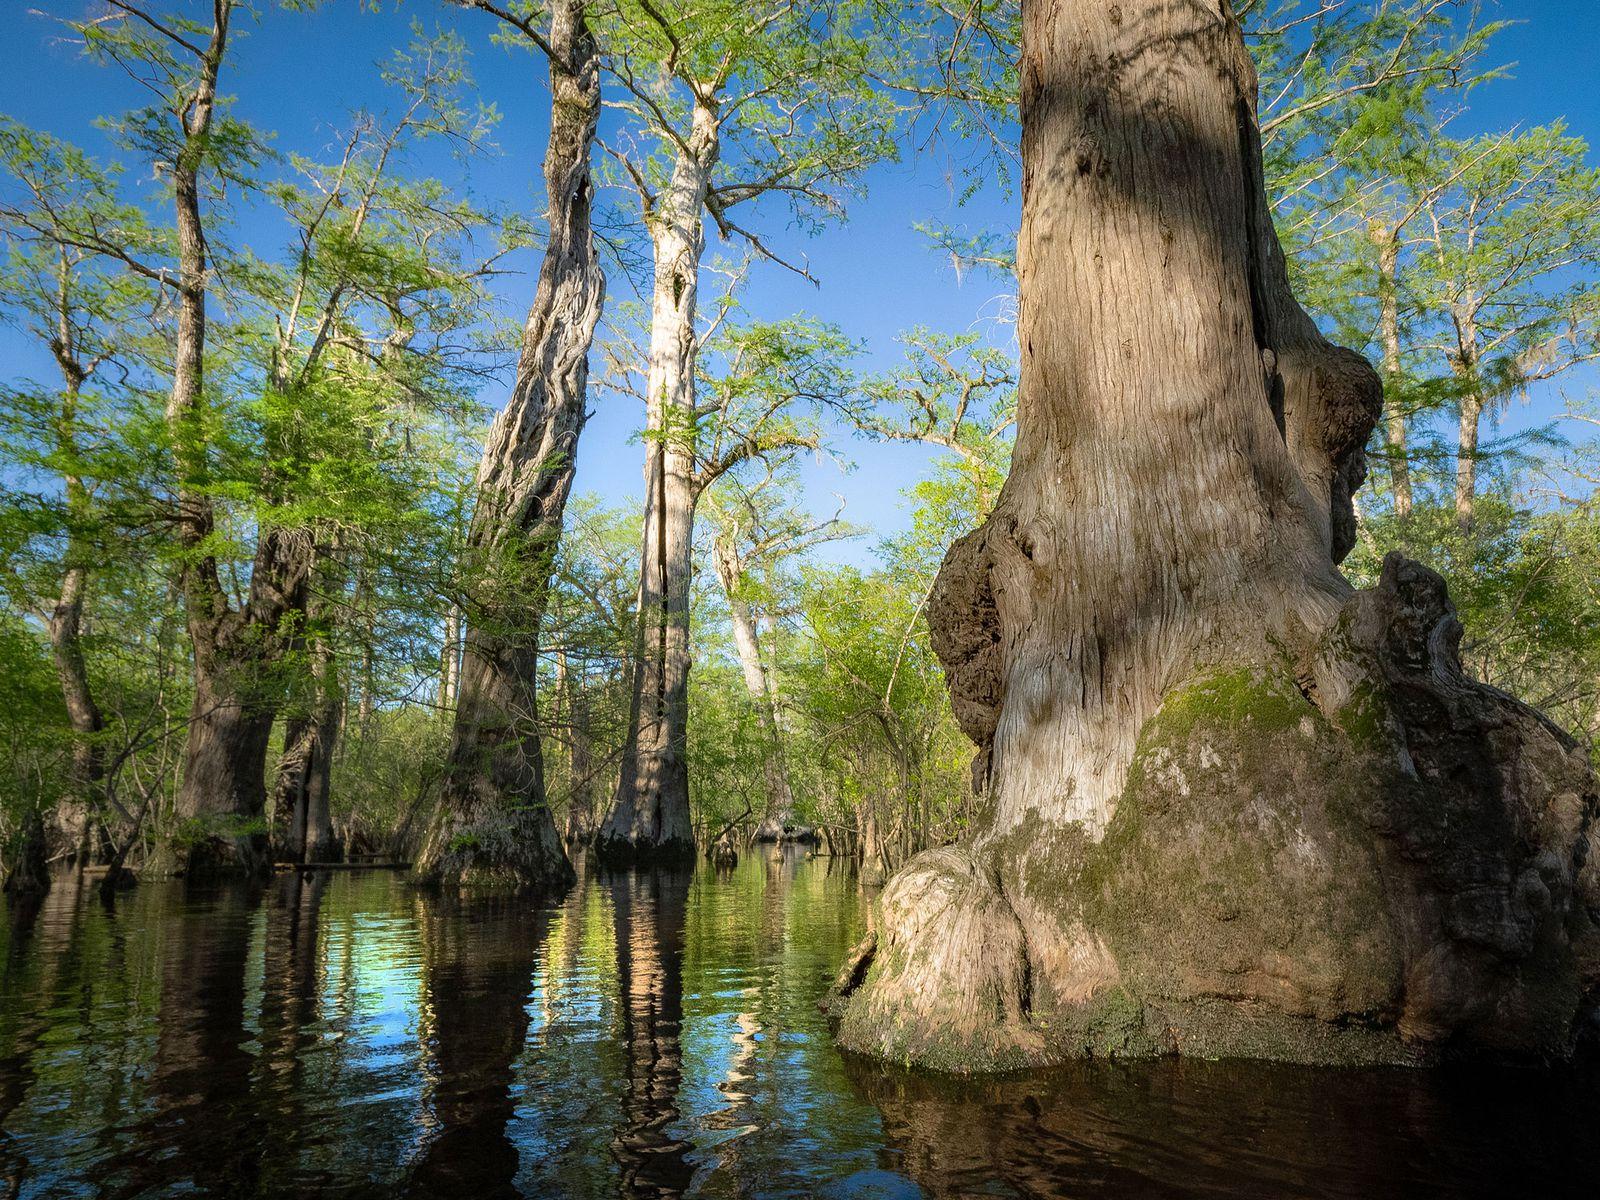 North Carolina Bald Cypresses Are Among the World's Oldest